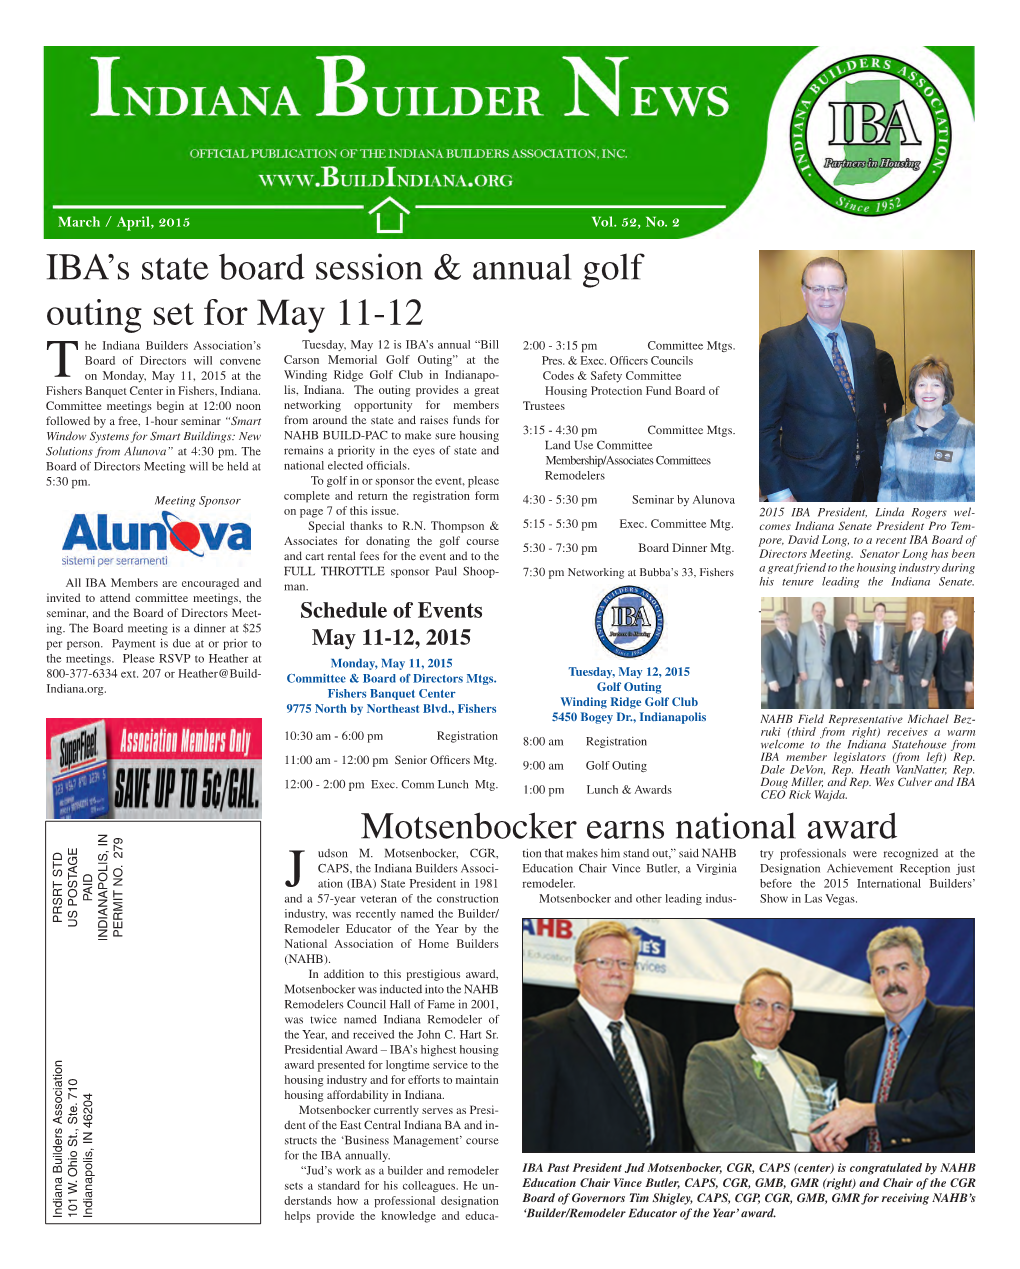 Motsenbocker Earns National Award IBA's State Board Session & Annual Golf Outing Set for May 11-12